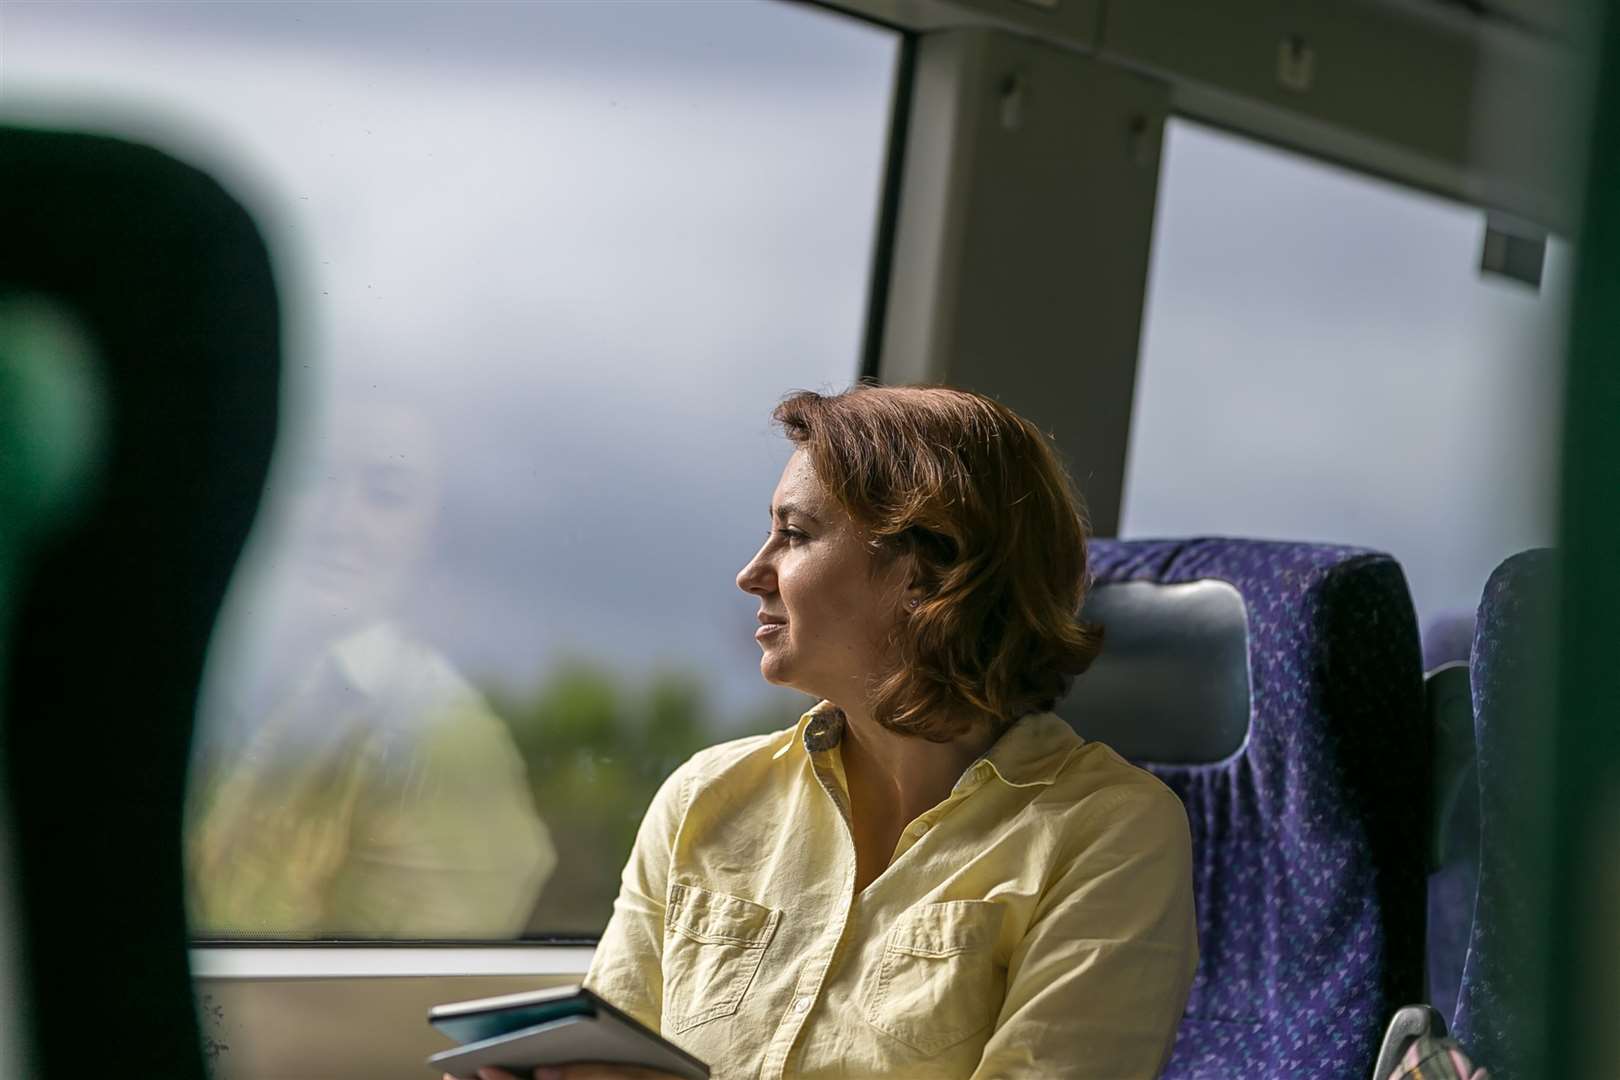 The safety of women and girls using public transport was discussed at Holyrood.